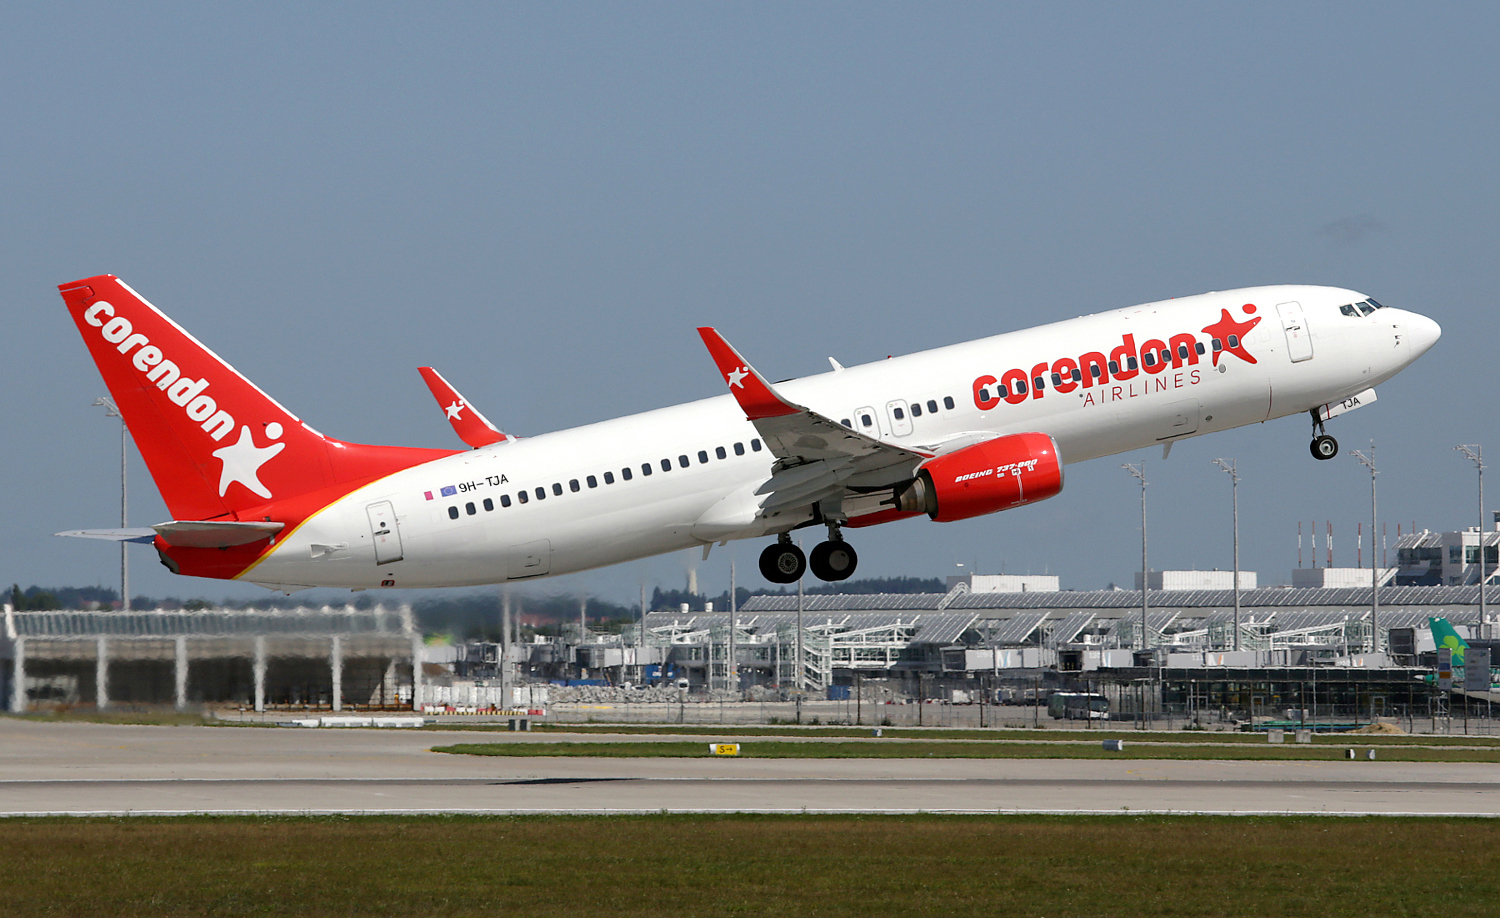 Corendon Airlines launches at Glasgow Airport providing flights to Turkey's Antalya and Dalaman